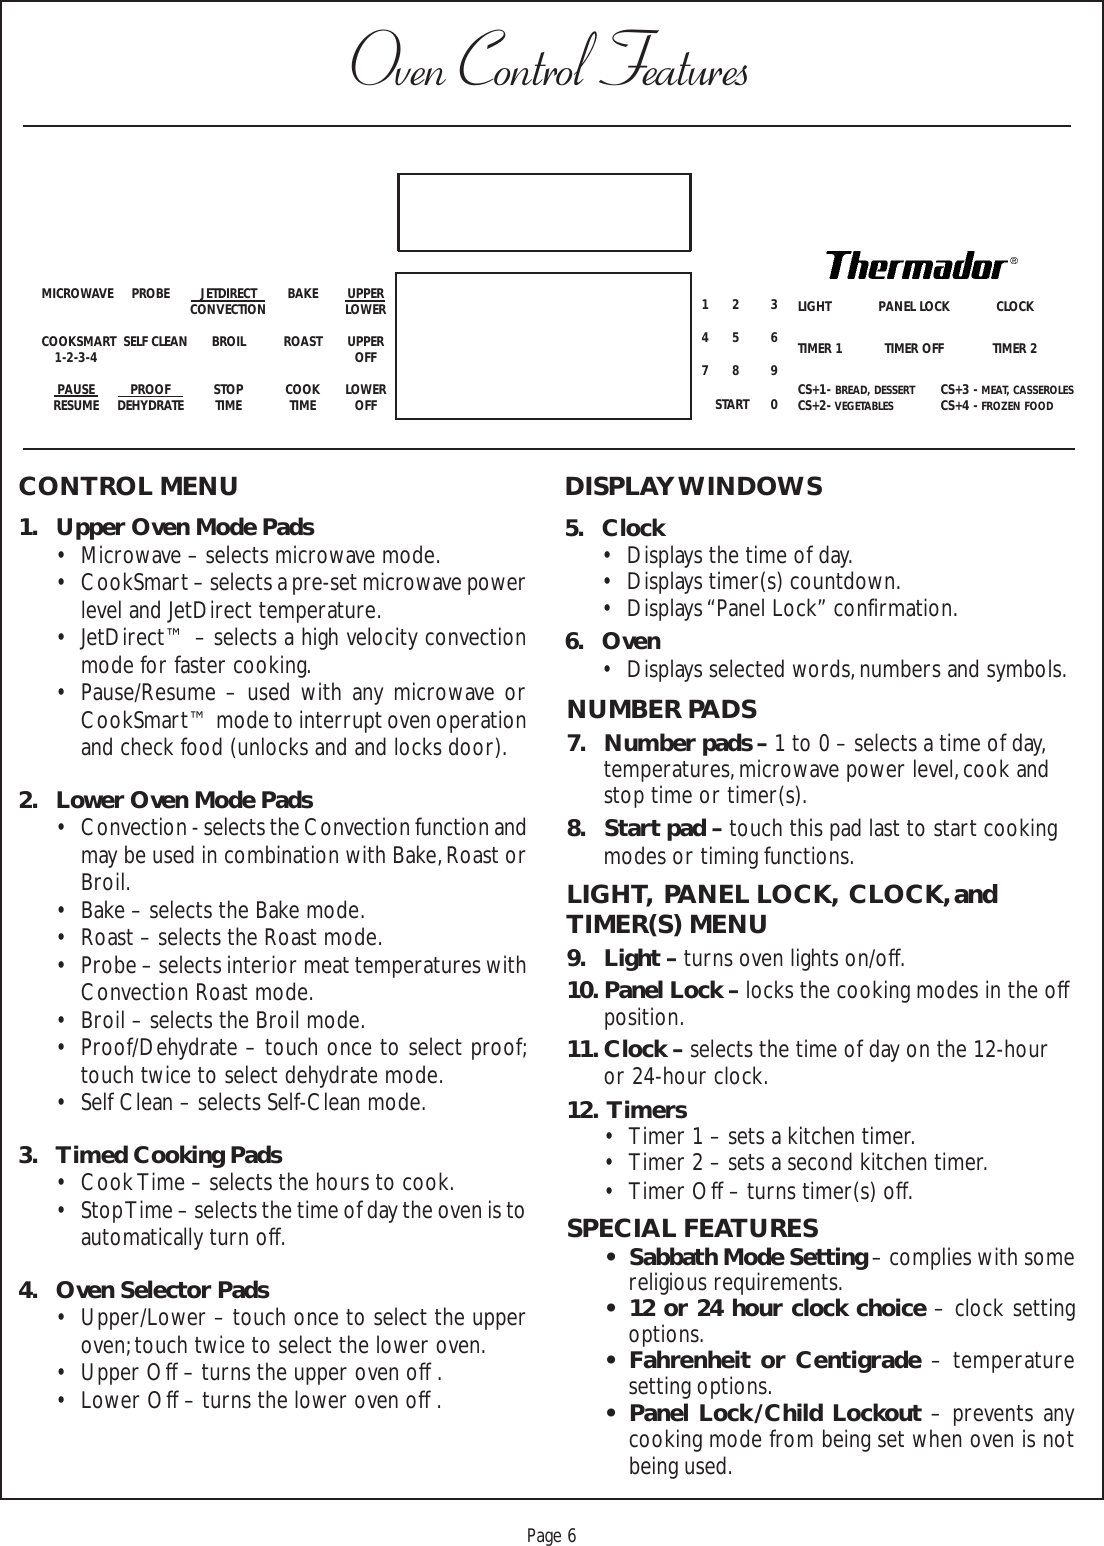 Proof 9-21-99Page 6CONTROL MENU1. Upper Oven Mode Pads• Microwave – selects microwave mode.• CookSmart – selects a pre-set microwave powerlevel and JetDirect temperature.• JetDirect™ – selects a high velocity convectionmode for faster cooking.• Pause/Resume – used with any microwave orCookSmart™ mode to interrupt oven operationand check food (unlocks and and locks door).2. Lower Oven Mode Pads• Convection - selects the Convection function andmay be used in combination with Bake, Roast orBroil.• Bake – selects the Bake mode.• Roast – selects the Roast mode.• Probe – selects interior meat temperatures withConvection Roast mode.• Broil – selects the Broil mode.• Proof/Dehydrate – touch once to select proof;touch twice to select dehydrate mode.• Self Clean – selects Self-Clean mode.3. Timed Cooking Pads• Cook Time – selects the hours to cook.• Stop Time – selects the time of day the oven is toautomatically turn off.4. Oven Selector Pads• Upper/Lower – touch once to select the upperoven; touch twice to select the lower oven.• Upper Off – turns the upper oven off .• Lower Off – turns the lower oven off .NUMBER PADS7. Number pads – 1 to 0 – selects a time of day,temperatures, microwave power level, cook andstop time or timer(s).8. Start pad – touch this pad last to start cookingmodes or timing functions.LIGHT,  PANEL LOCK,  CLOCK, andTIMER(S) MENU9. Light – turns oven lights on/off.10. Panel Lock – locks the cooking modes in the offposition.11. Clock – selects the time of day on the 12-houror 24-hour clock.12.  Timers• Timer 1 – sets a kitchen timer.• Timer 2 – sets a second kitchen timer.• Timer Off – turns timer(s) off.SPECIAL FEATURES• Sabbath Mode Setting – complies with somereligious requirements.• 12 or 24 hour clock choice – clock settingoptions.• Fahrenheit or Centigrade – temperaturesetting options.• Panel Lock / Child Lockout – prevents anycooking mode from being set when oven is notbeing used.Oven Control FeaturesMICROWAVE PROBE JETDIRECT BAKE UPPERCONVECTION LOWERCOOKSMART  SELF CLEAN BROIL ROAST UPPER1-2-3-4 OFFPAUSE PROOF STOP COOK LOWERRESUME DEHYDRATE TIME TIME OFFLIGHT PANEL LOCK CLOCKTIMER 1 TIMER OFF TIMER 2CS+1- BREAD, DESSERTCS+3 - MEAT, CASSEROLESCS+2- VEGETABLESCS+4 - FROZEN FOOD12 345 678 9START 0COOK TIMESTOP TIMESTART ATSELF CONVECTION BAKE MICROWAVE PROBECLEAN ROAST BROIL COOKSMART PREHEAT0  0 :  0  00  0 :  0  00 0 0CSET CLOCKTIMER 2TIMER 1MINSECHRSMINPANEL LOCK0 0:  0 0MICROWAVEPAUSEDISPLAY WINDOWS5. Clock• Displays the time of day.• Displays timer(s) countdown.• Displays “Panel Lock” confirmation.6. Oven• Displays selected words, numbers and symbols.